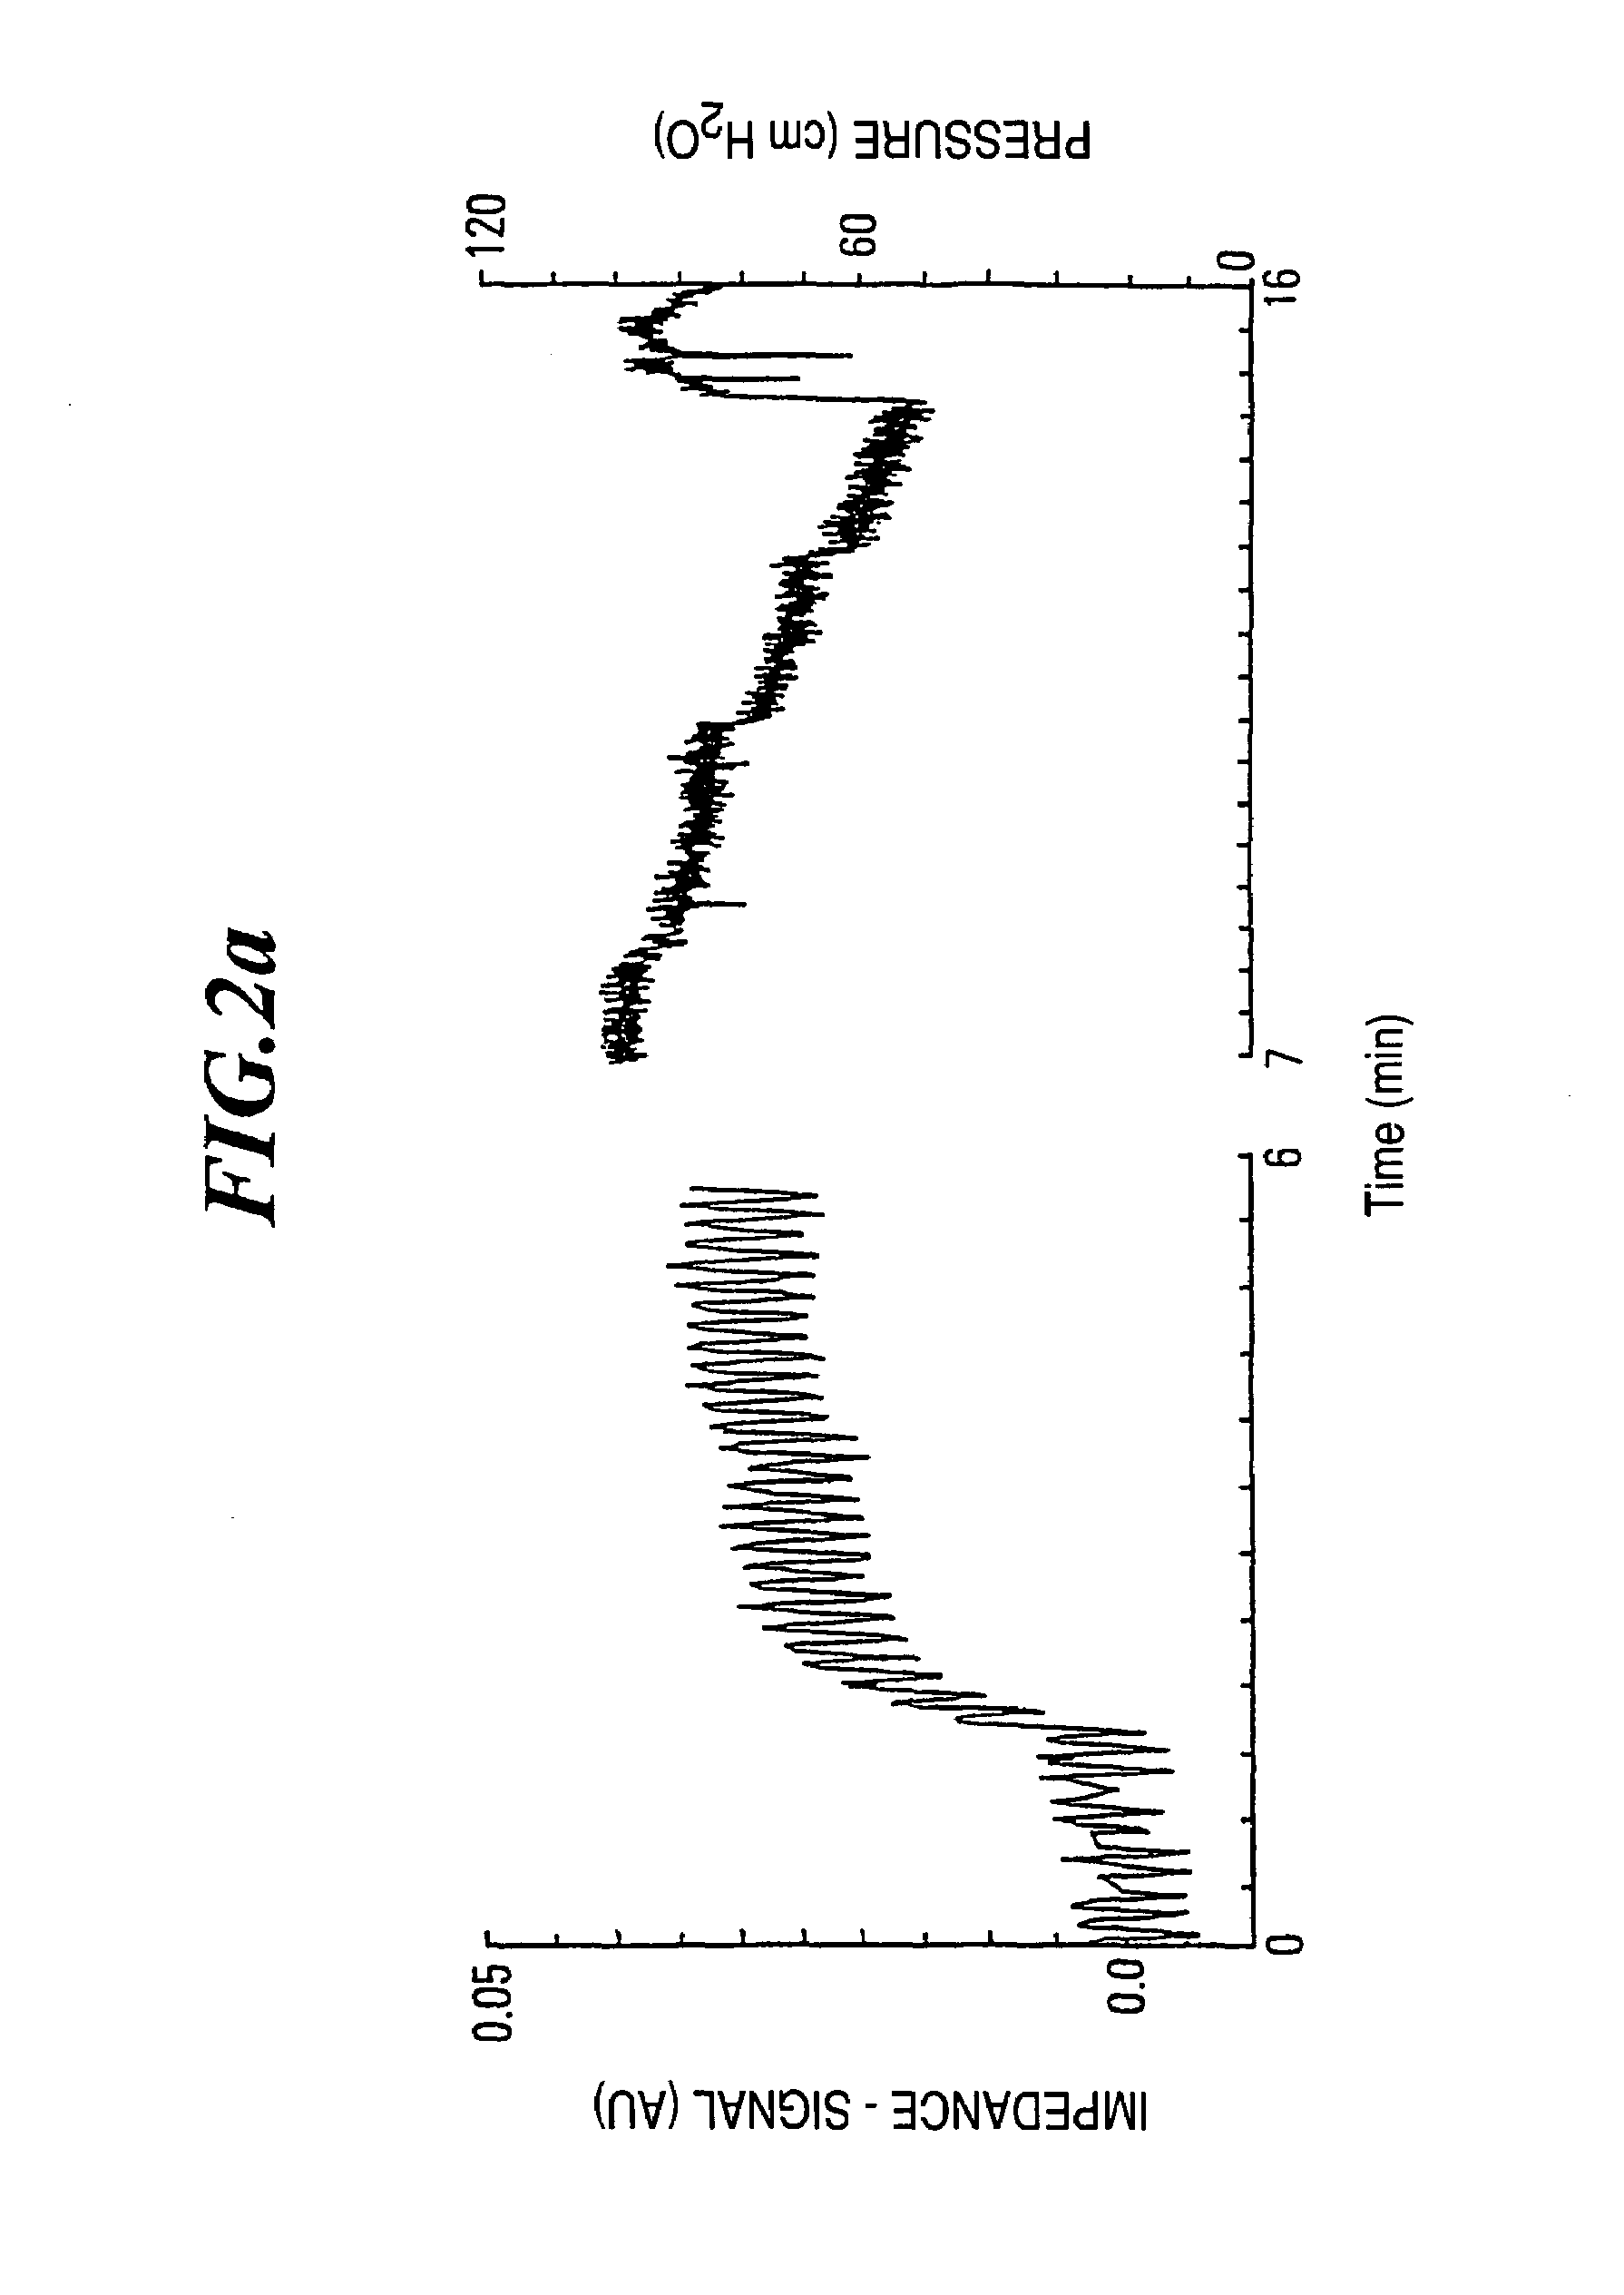 Method and apparatus for determining alveolar opening and closing